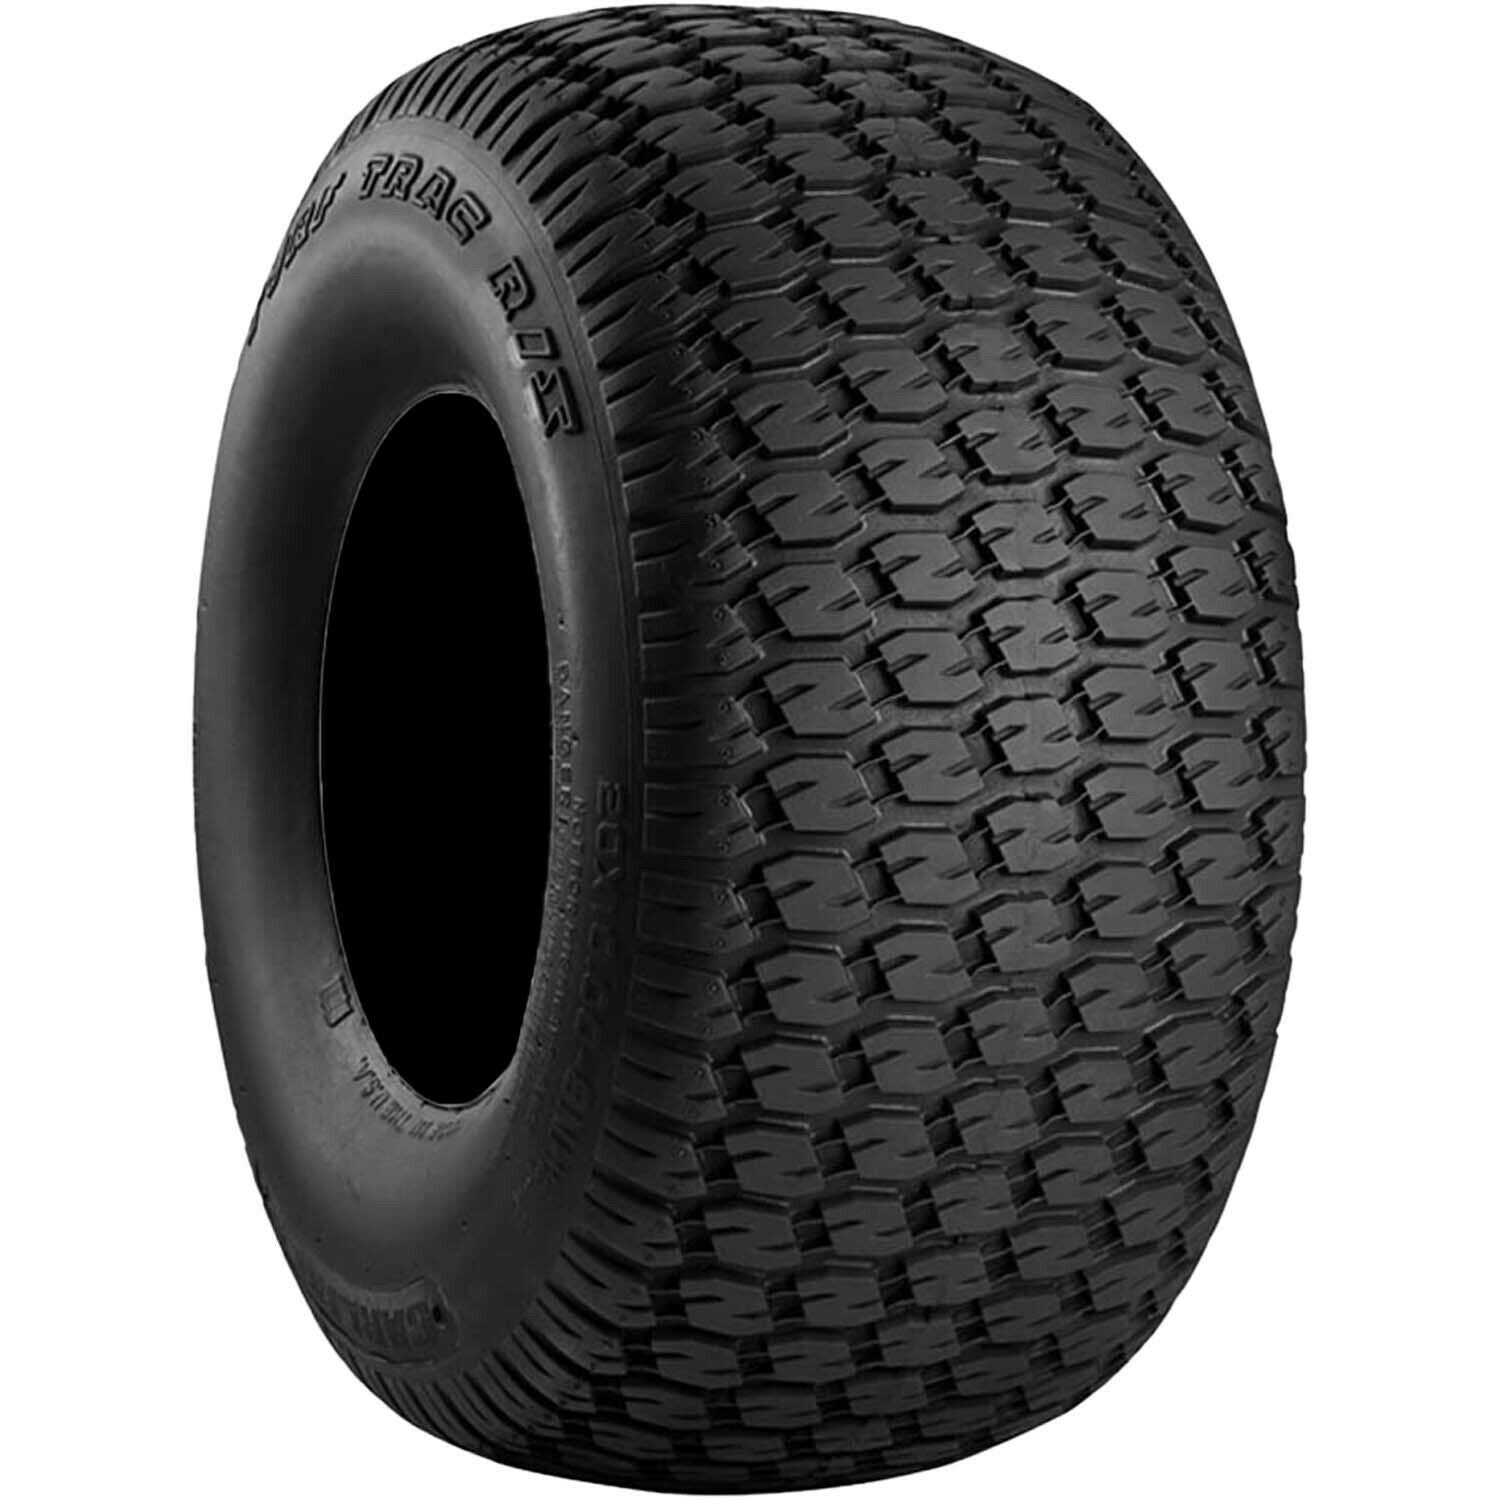 Carlisle Turf Trac R/S Lawn and Garden Tire 4ply 20x10.00-10